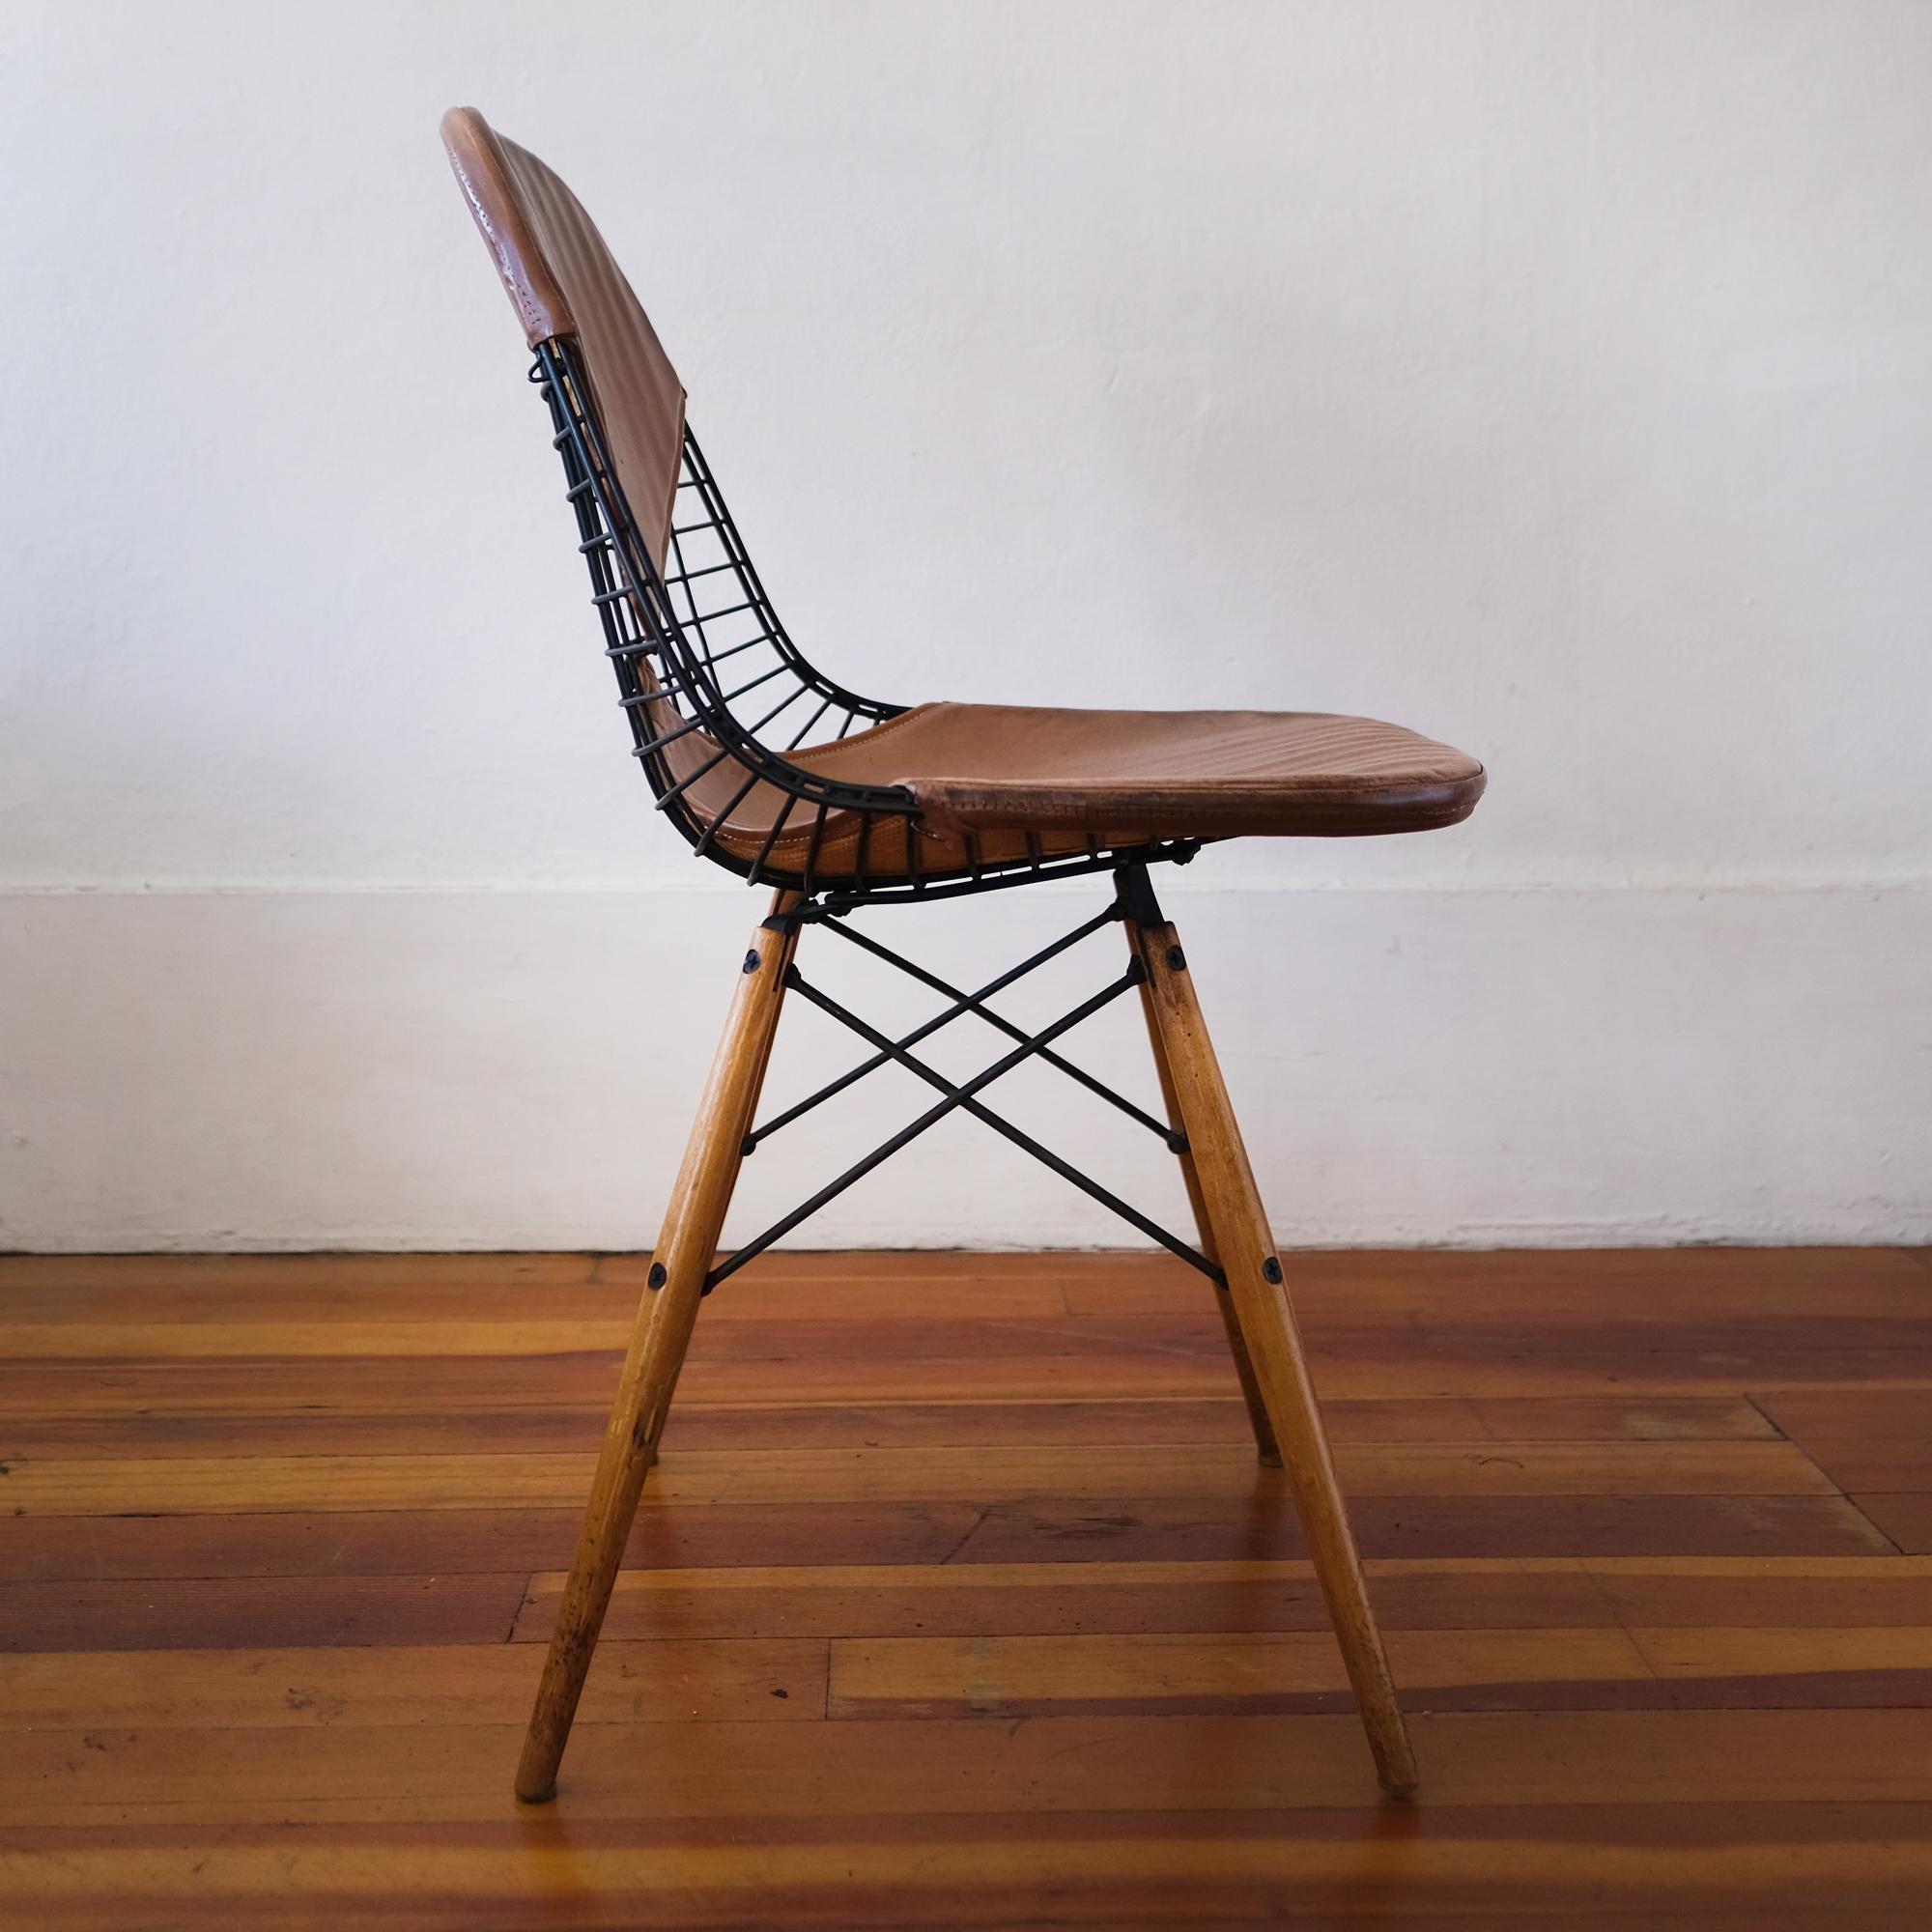 Charles and Ray Eames DKW-2 swivel dowel wire chair with postman bag leather bikini cover. All original with beautiful age appropriate patina.

Labeled: Herman Miller Furniture Company Venice, California.